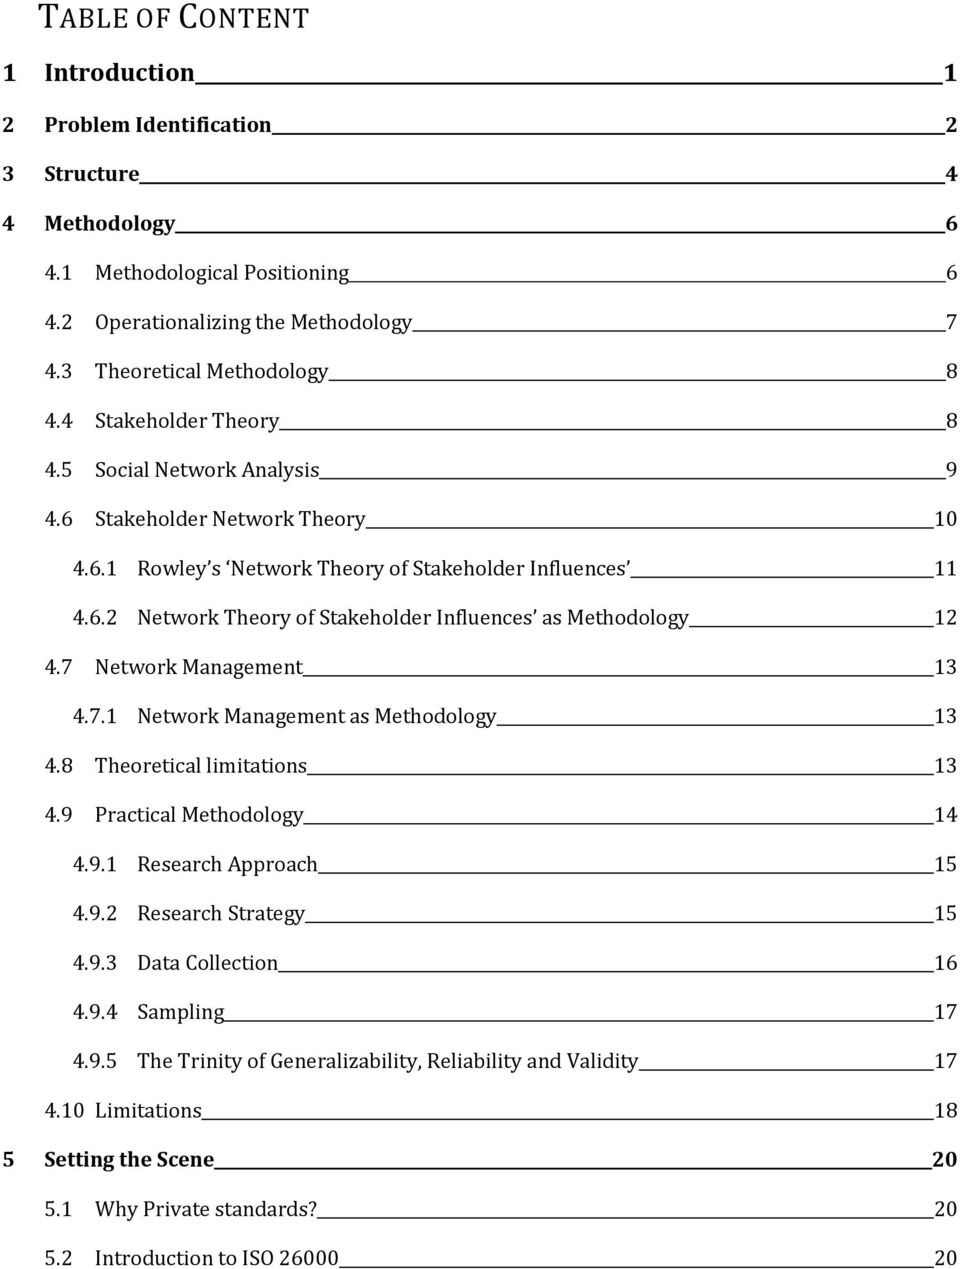 7 Network Management 13 4.7.1 Network Management as Methodology 13 4.8 Theoretical limitations 13 4.9 Practical Methodology 14 4.9.1 Research Approach 15 4.9.2 Research Strategy 15 4.9.3 Data Collection 16 4.